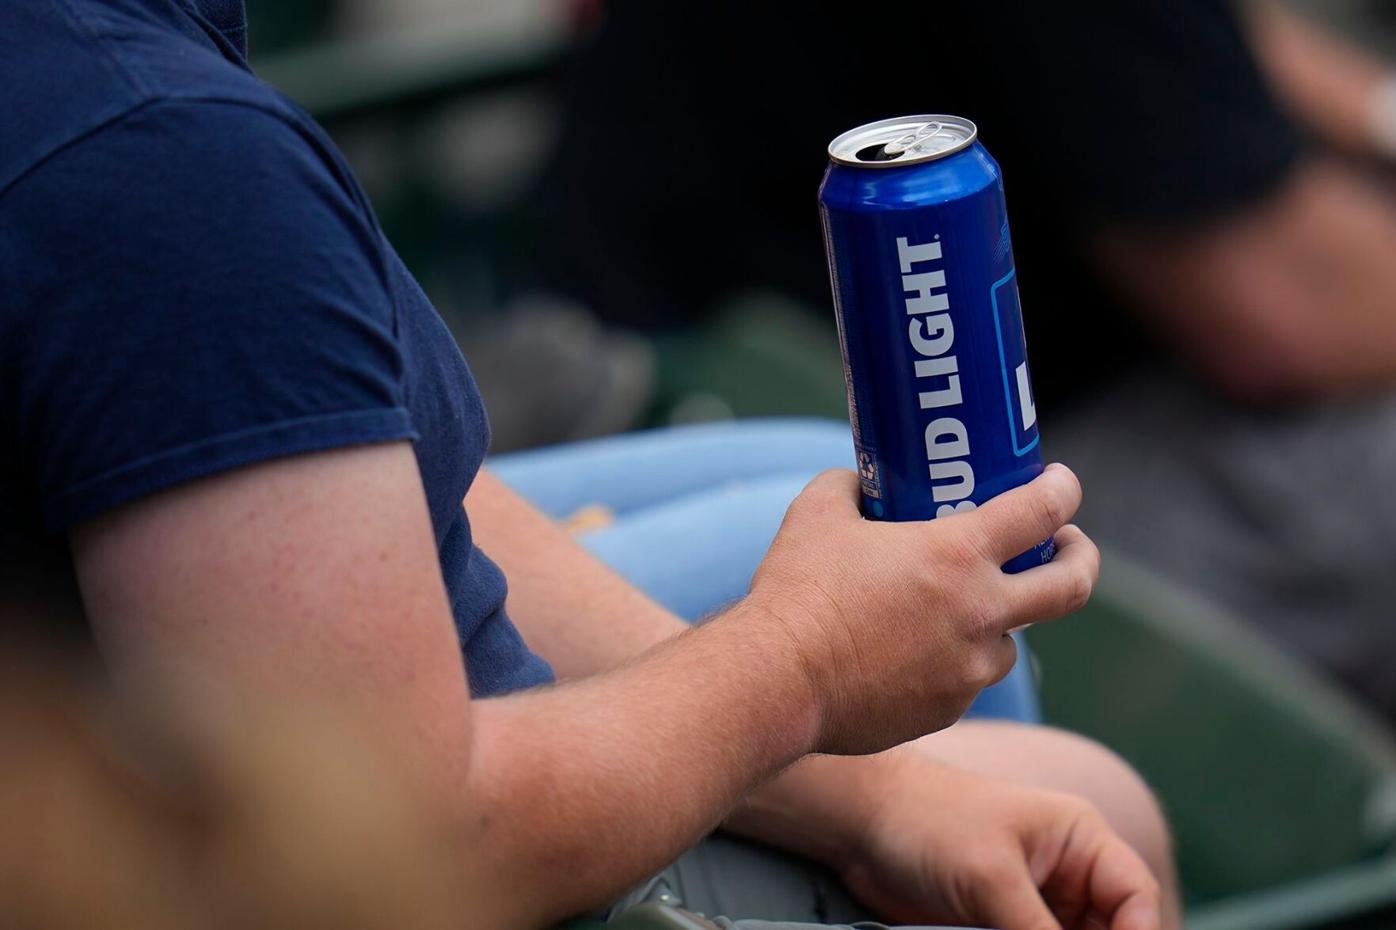 Anheuser-Busch loses top LGBTQ+ rating over its Bud Light response, Business